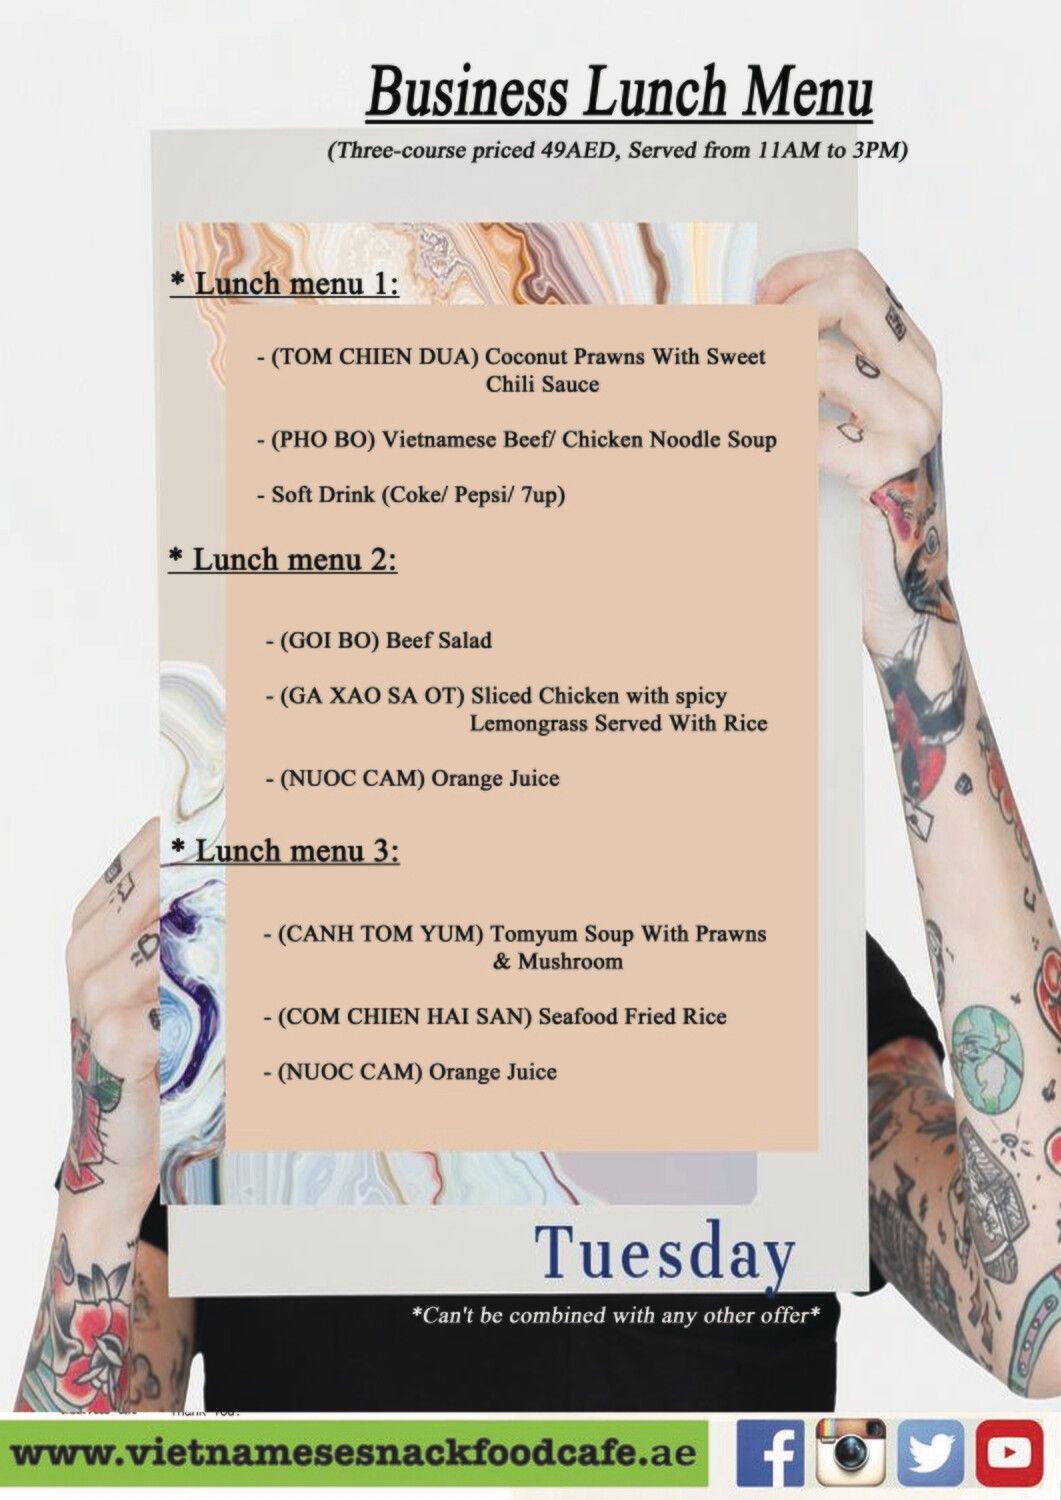 Business Lunch Menu Tuesday